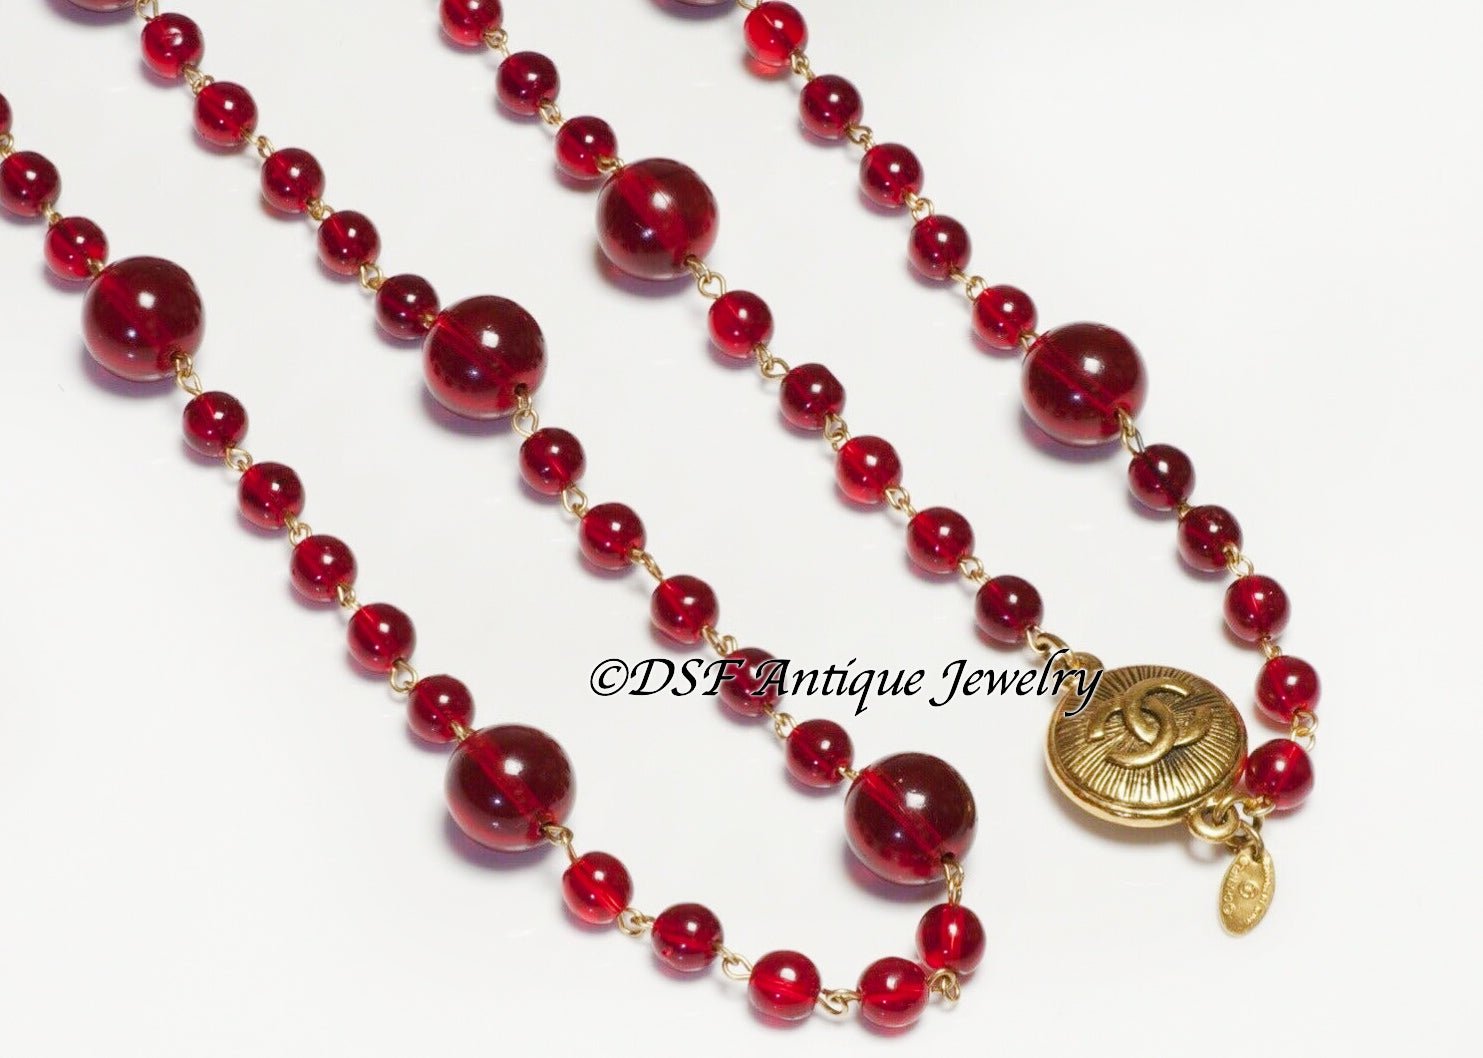 CHANEL Paris 1990’s Red Poured Glass Beads Sautoir Chain Necklace - DSF Antique Jewelry